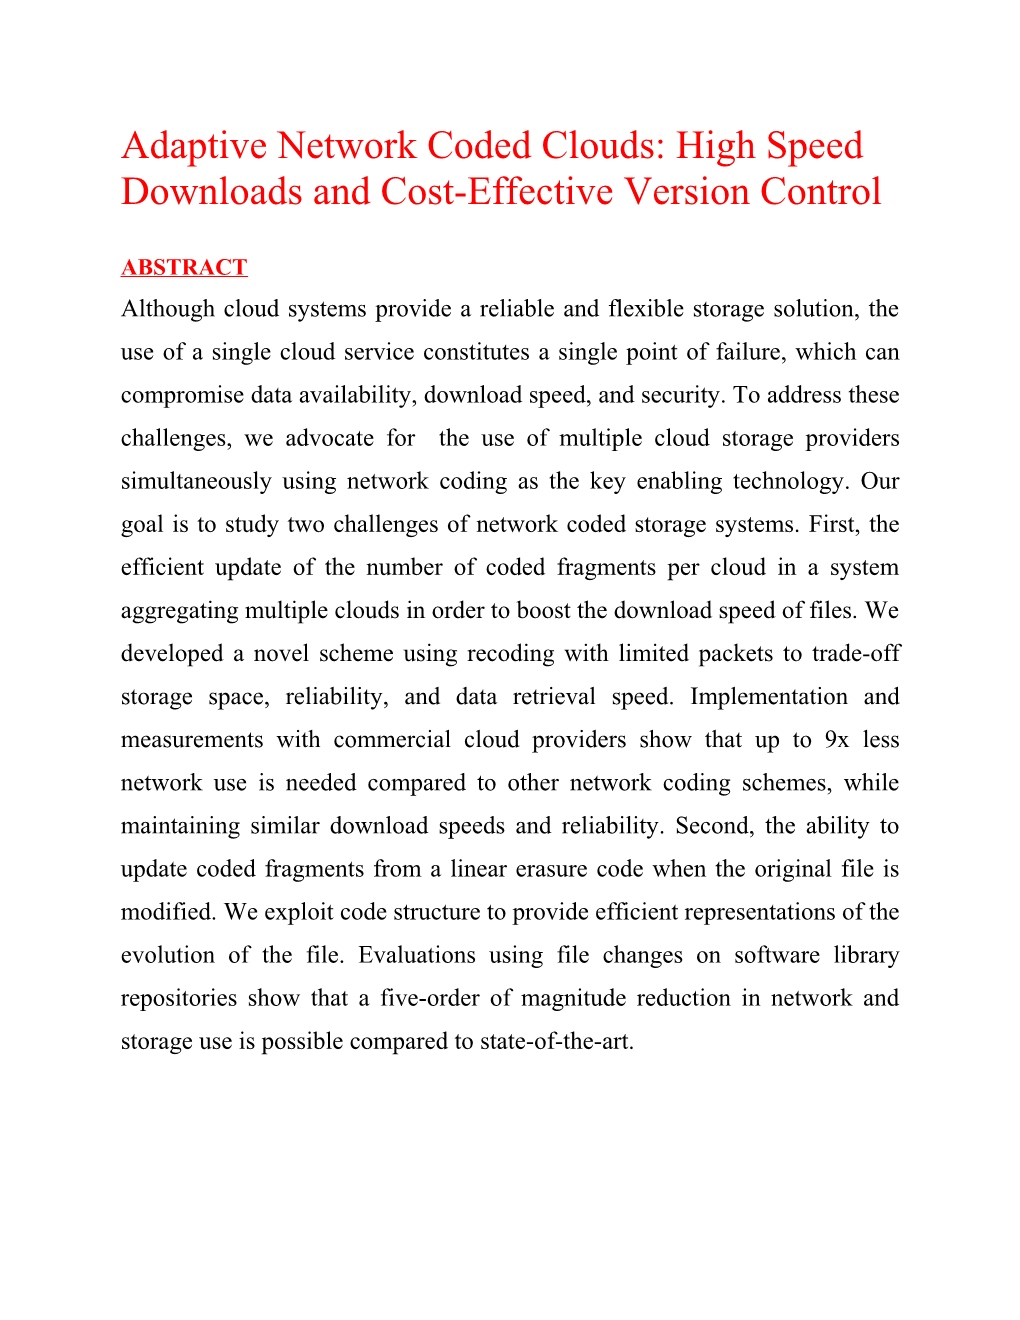 Adaptive Network Coded Clouds: High Speed Downloads and Cost-Effective Version Control